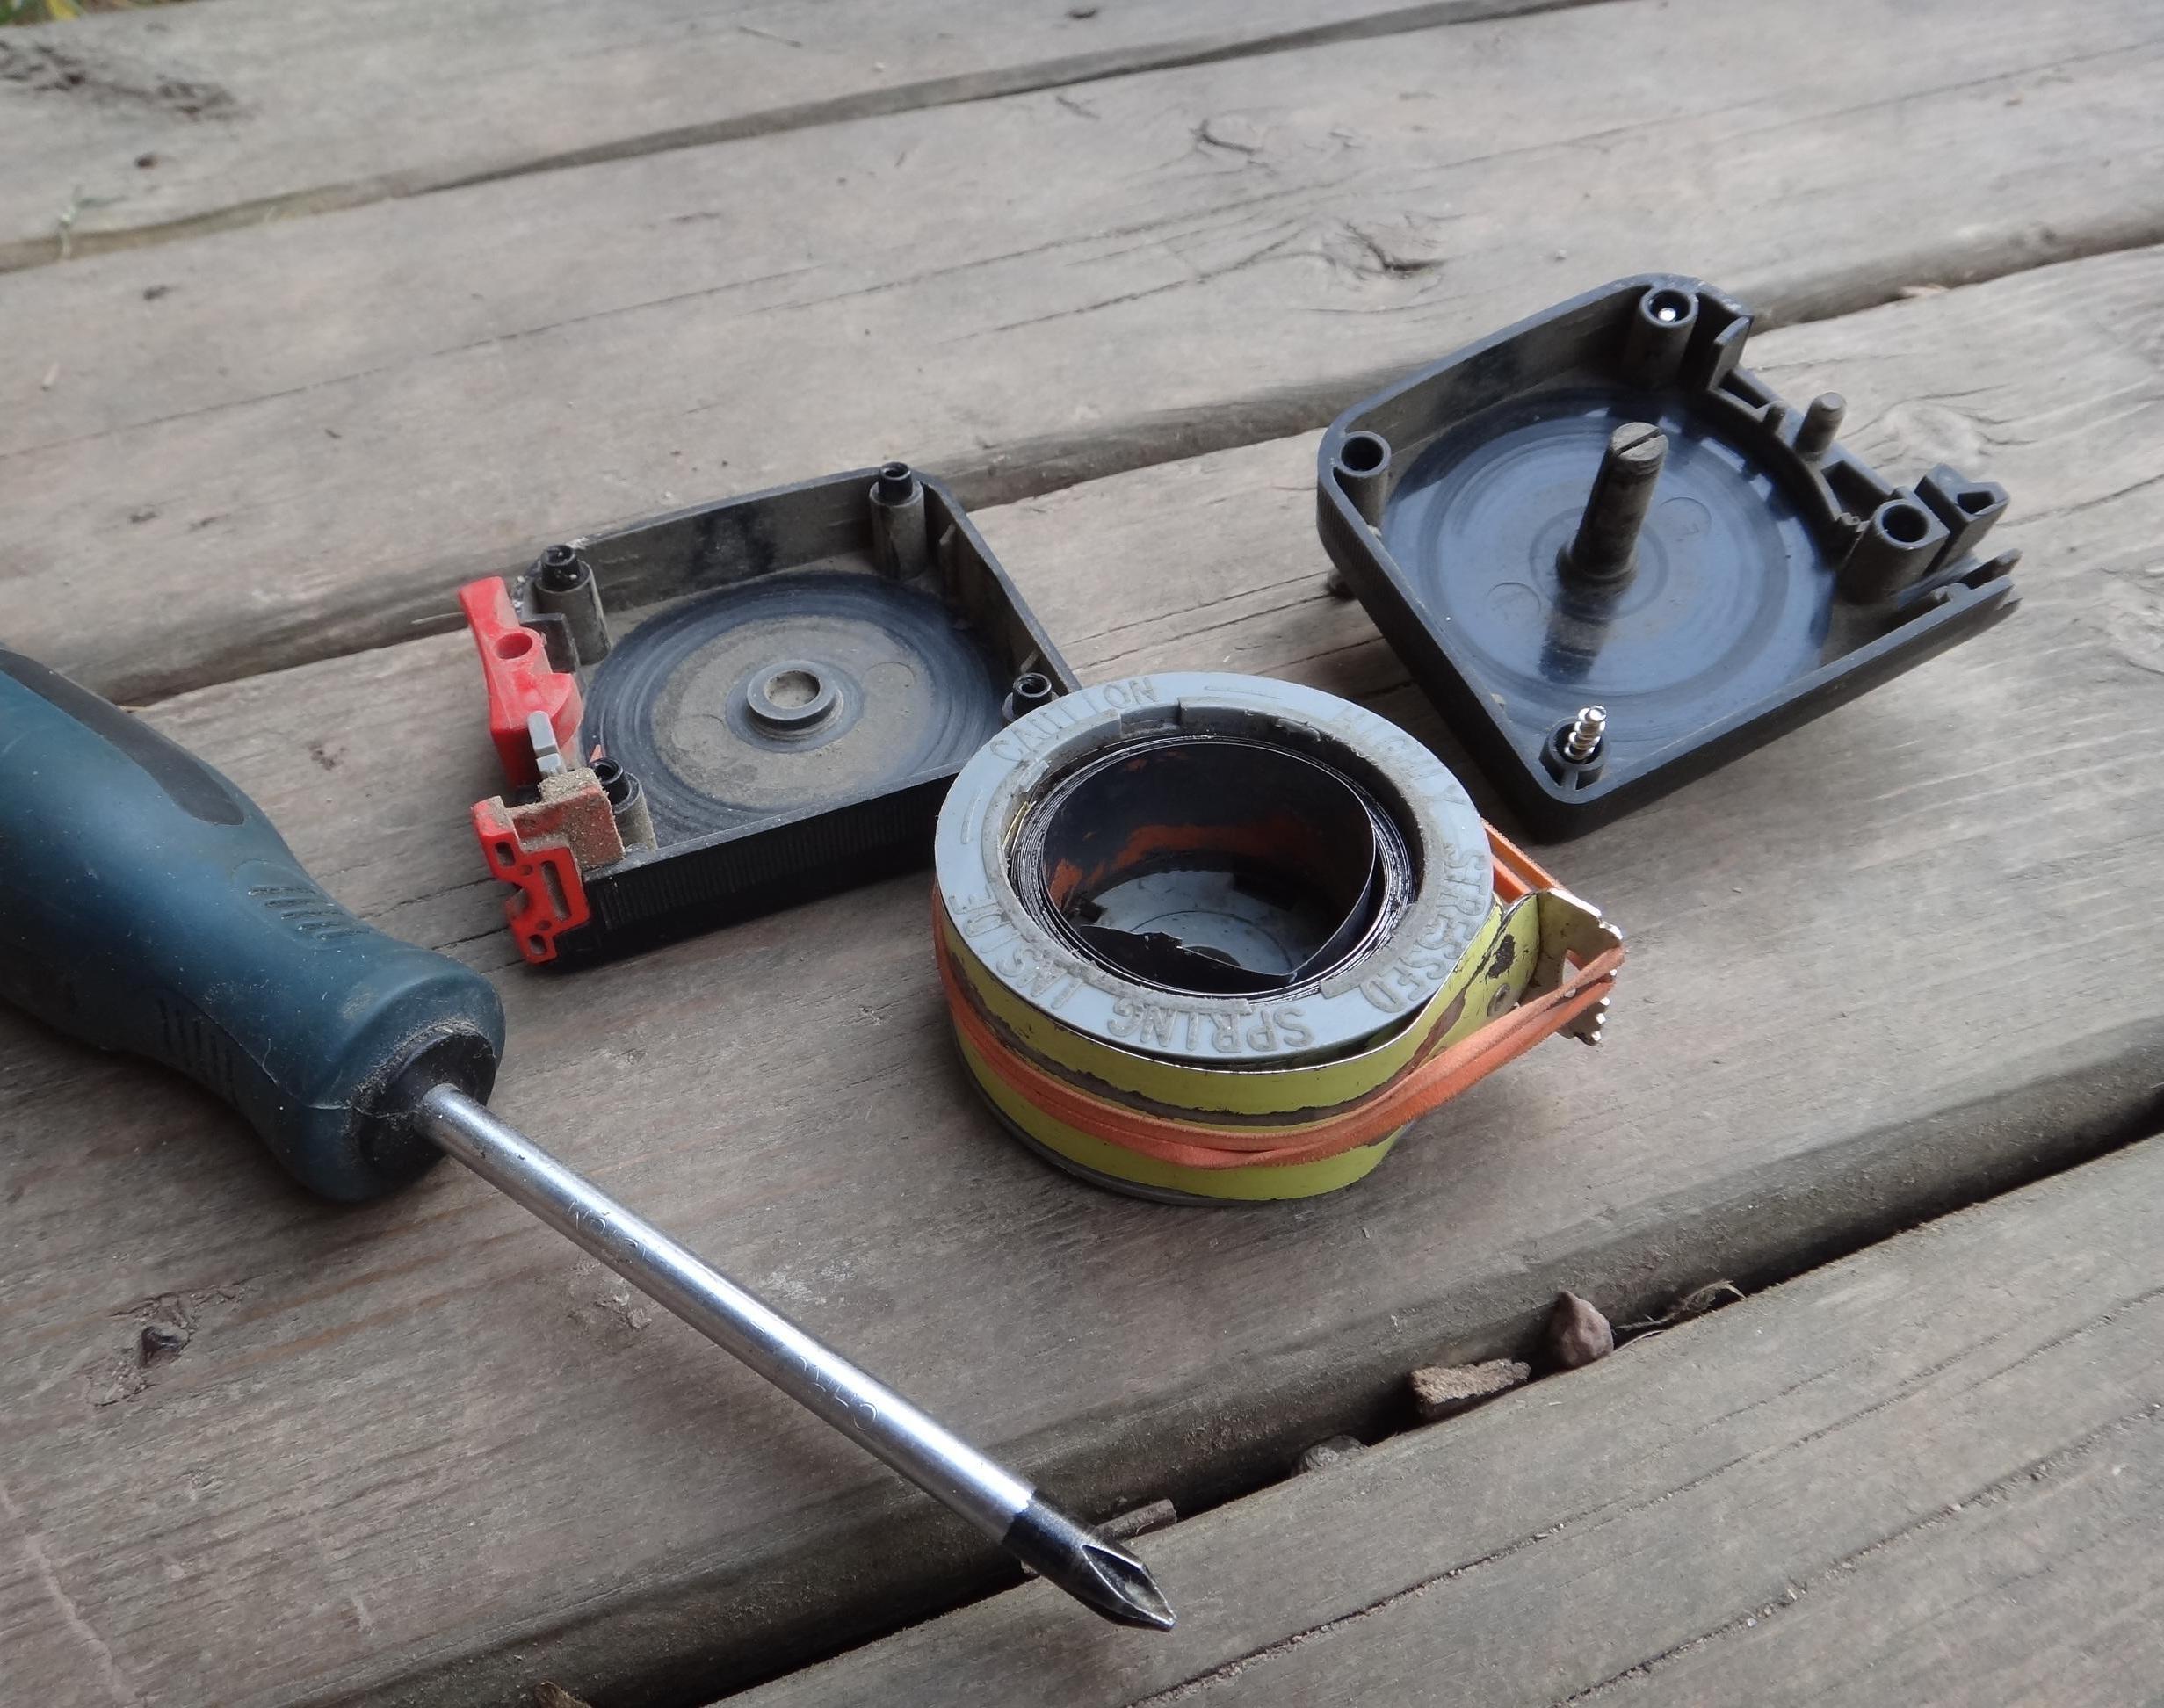 How to Fix a Measuring Tape That Won't Retract (Broken Spring)